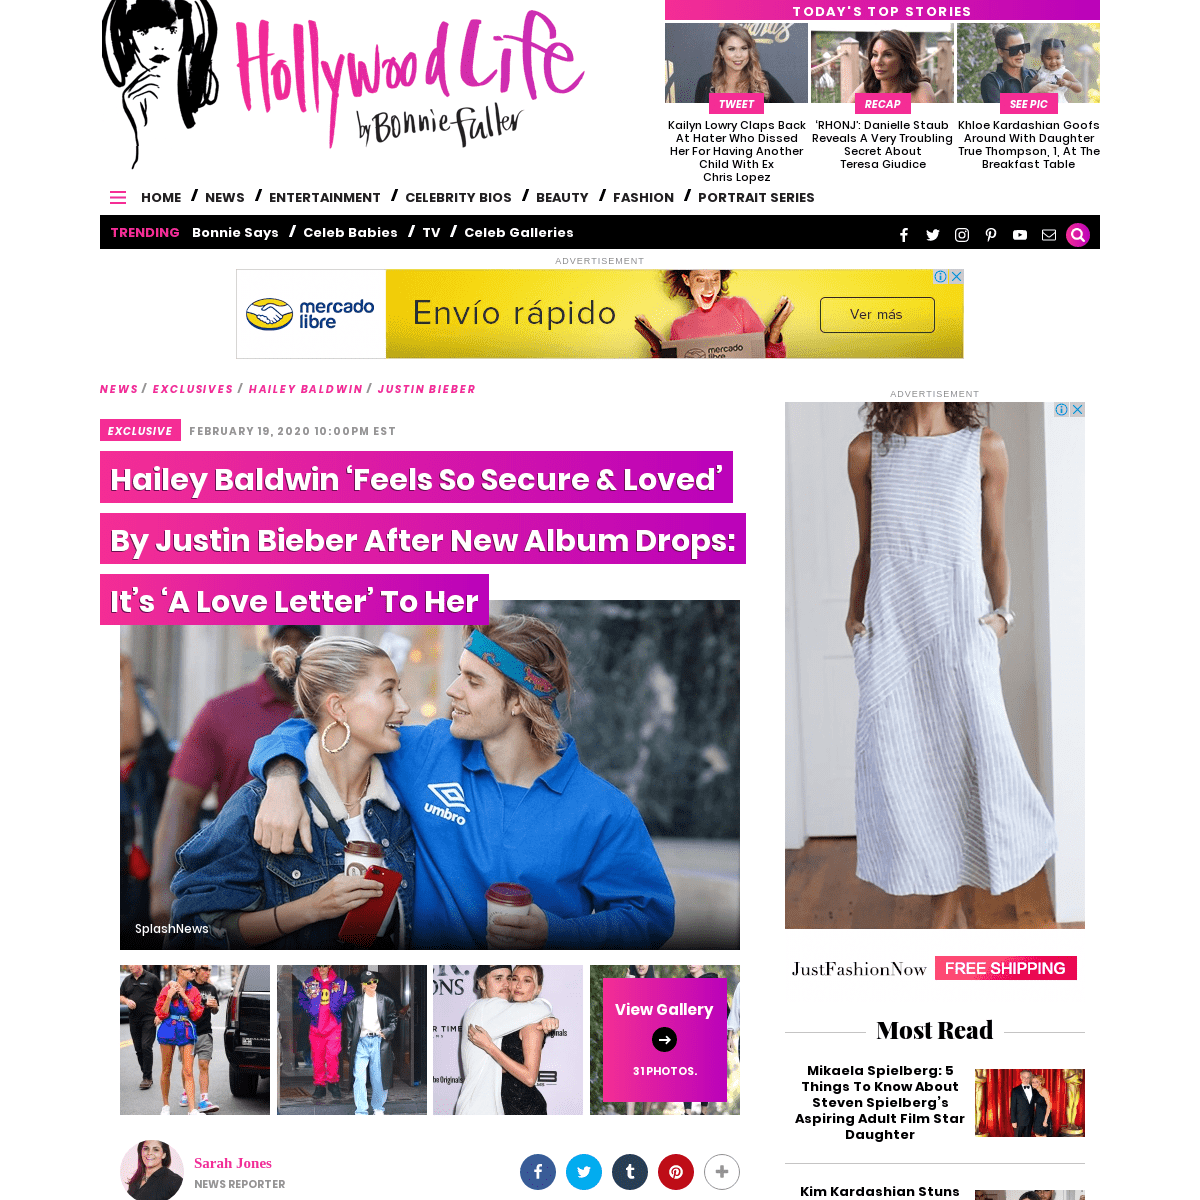 A complete backup of hollywoodlife.com/2020/02/19/hailey-baldwin-reaction-justin-bieber-new-album-secure-loved/